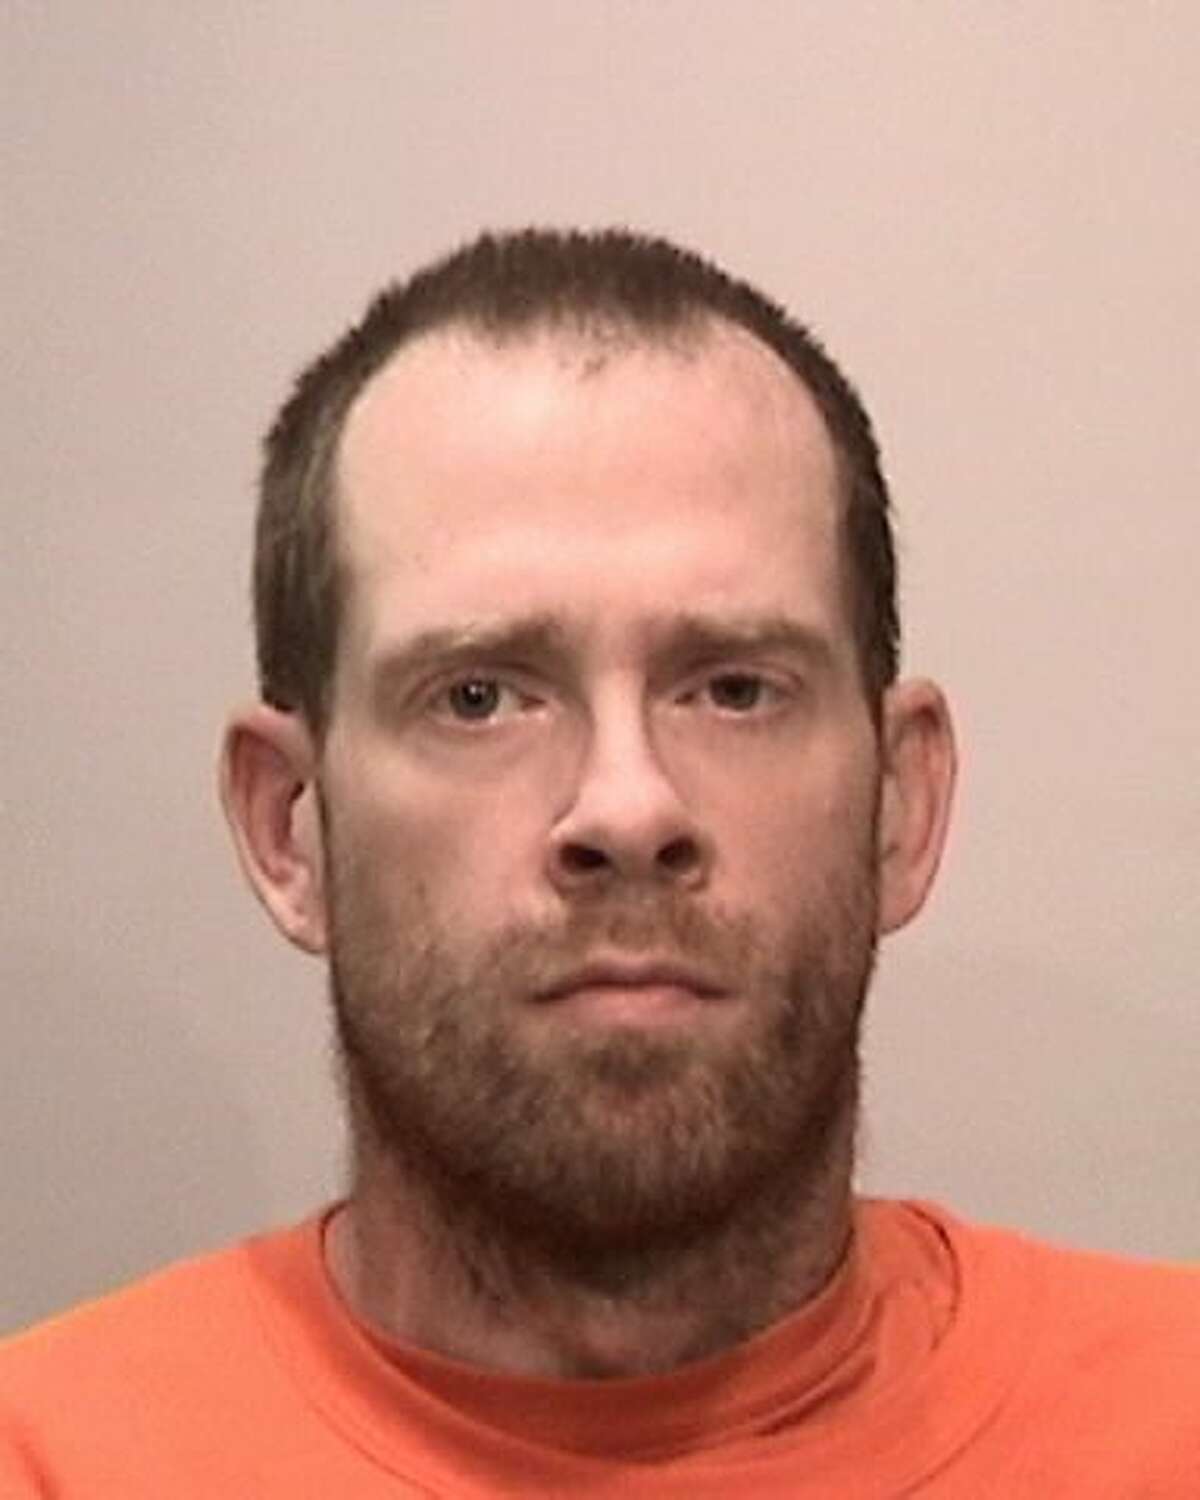 The Scanner SF man renews sex offender registration while carrying cell phone full of child porn, police pic